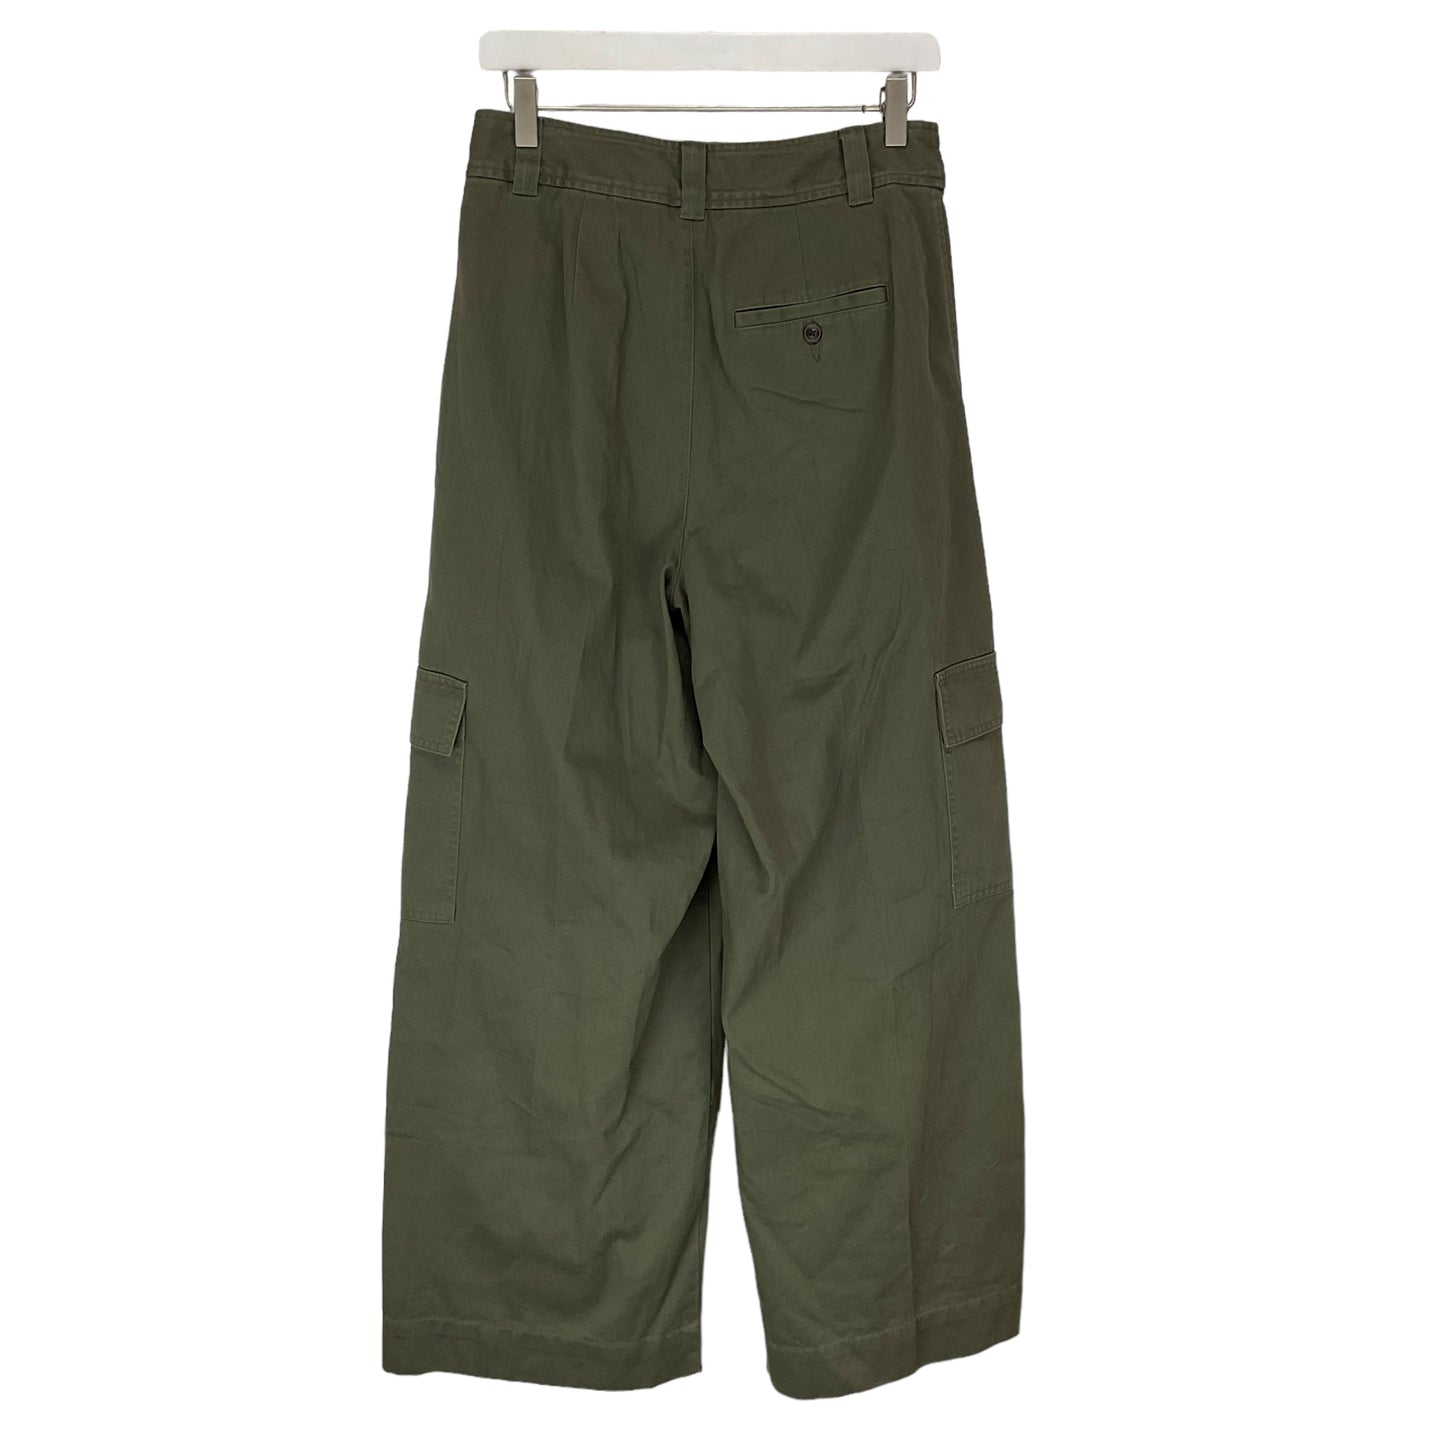 Green Pants Cargo & Utility Madewell, Size 6